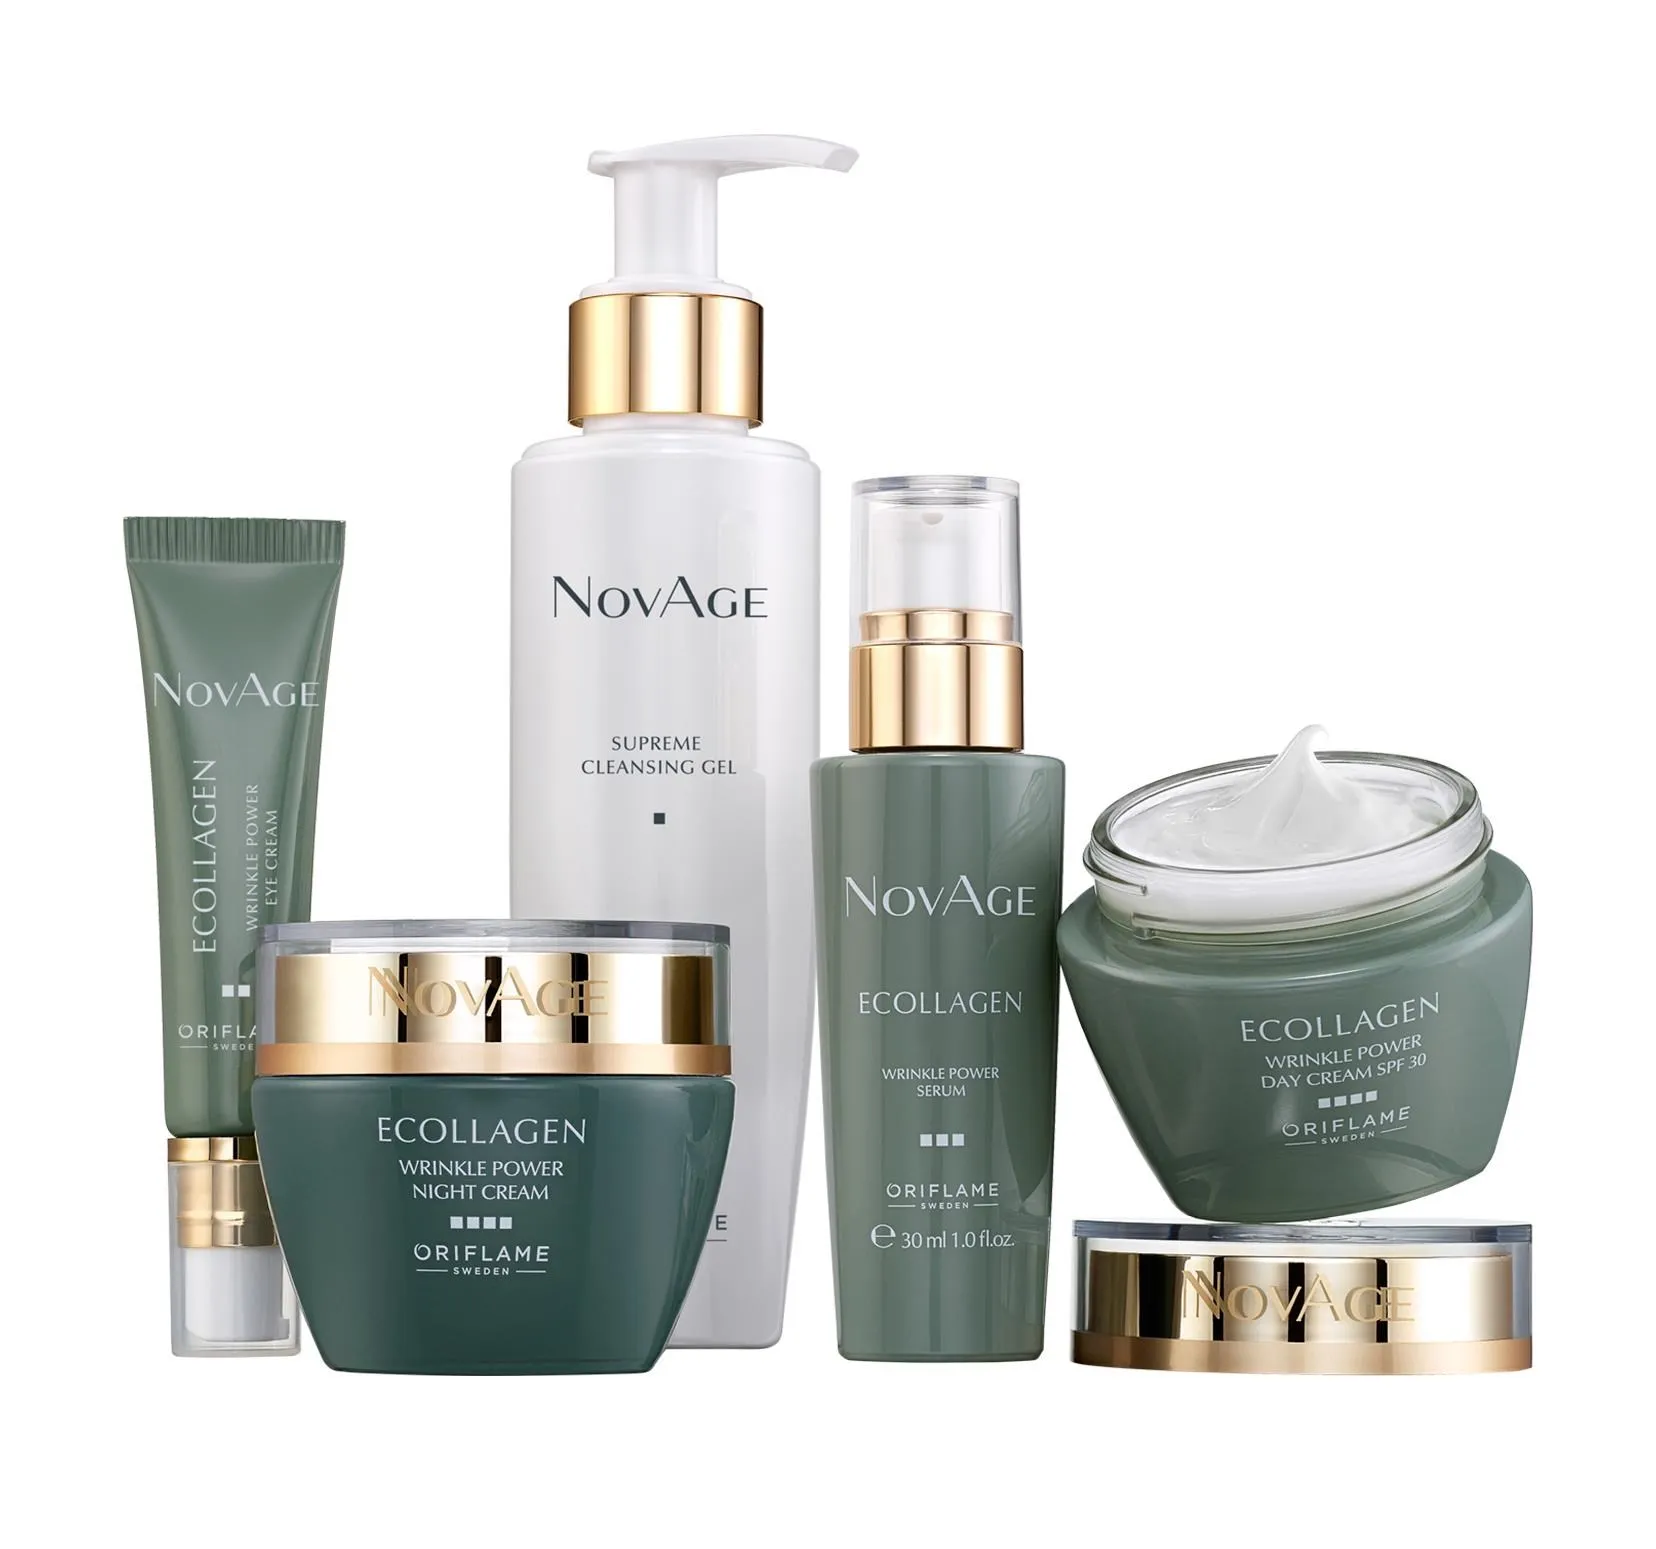 NOVAGE Ecollagen Wrinkle Power SET - instantly smoothes wrinkles by up to 49%, and helps boost collagen to correct wrinkles